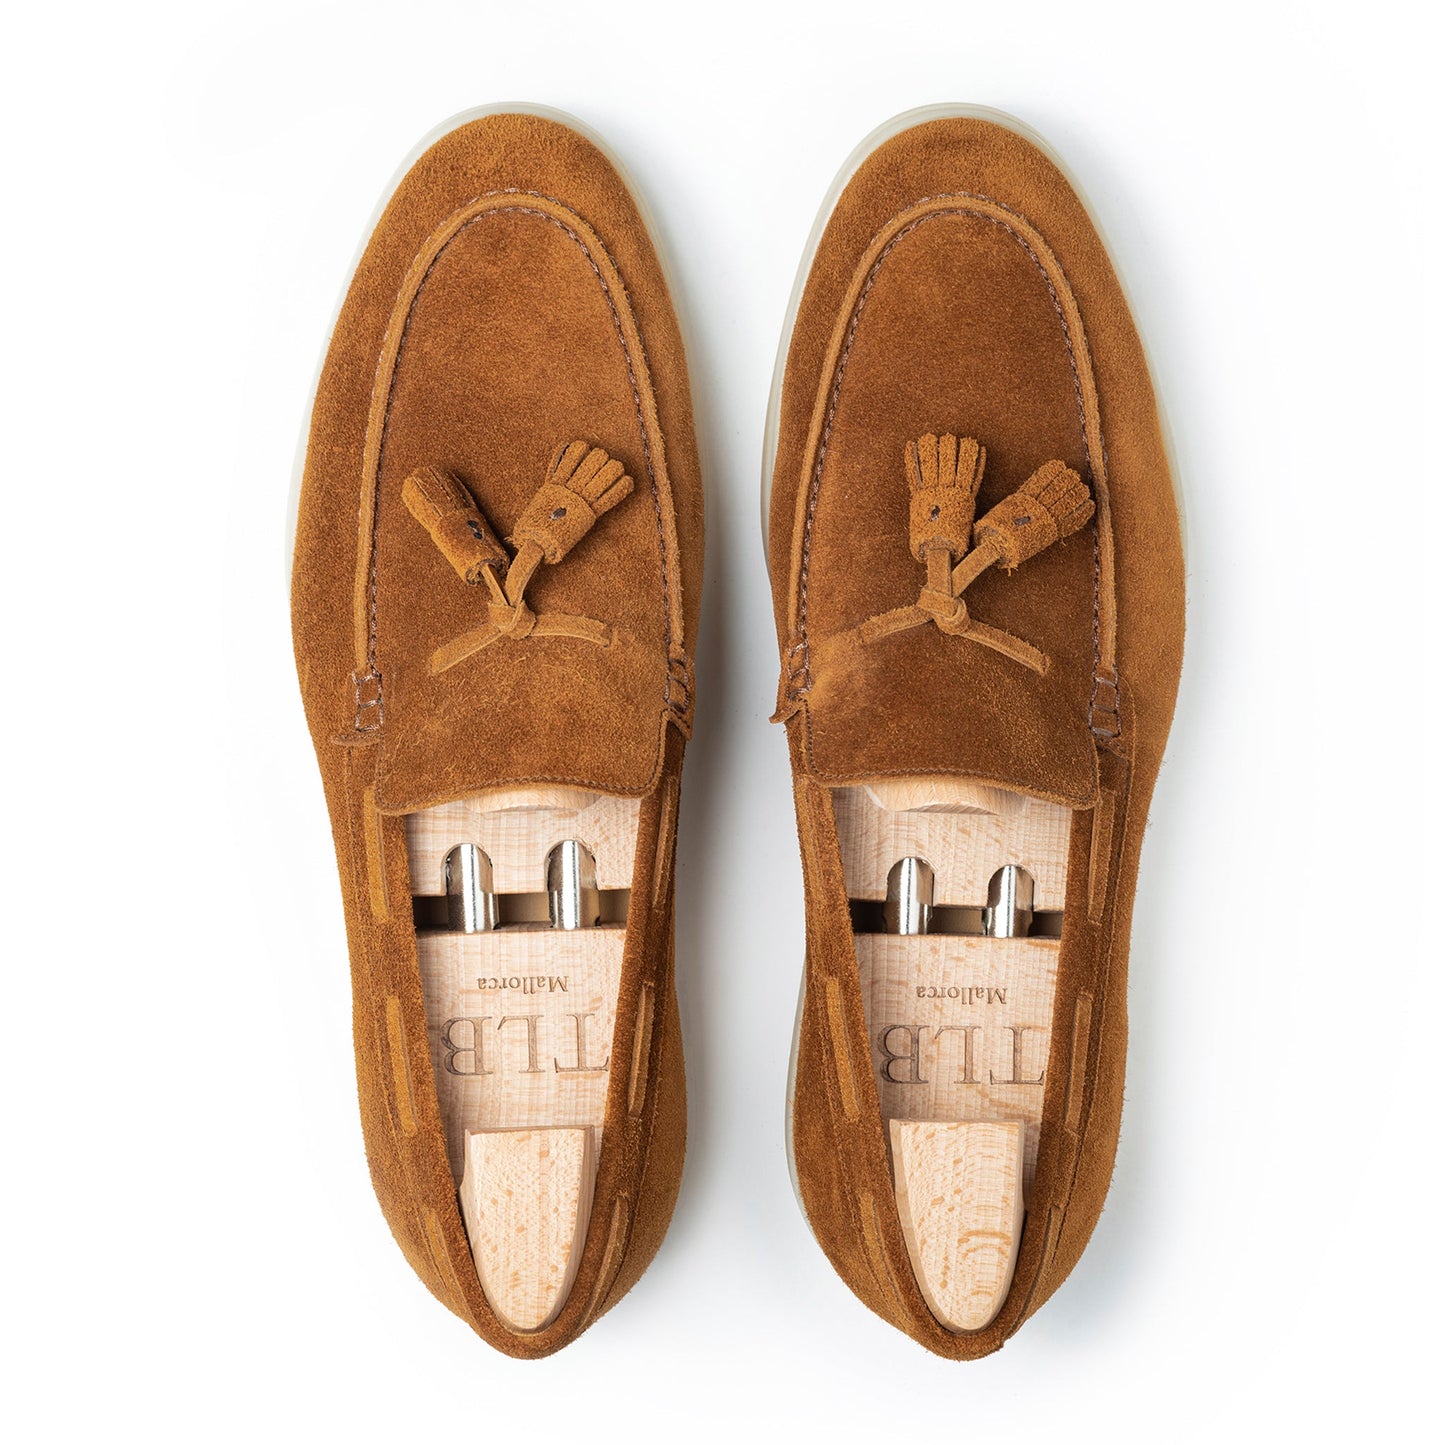 TLB Mallorca leather shoes - Men's tassel loafers 